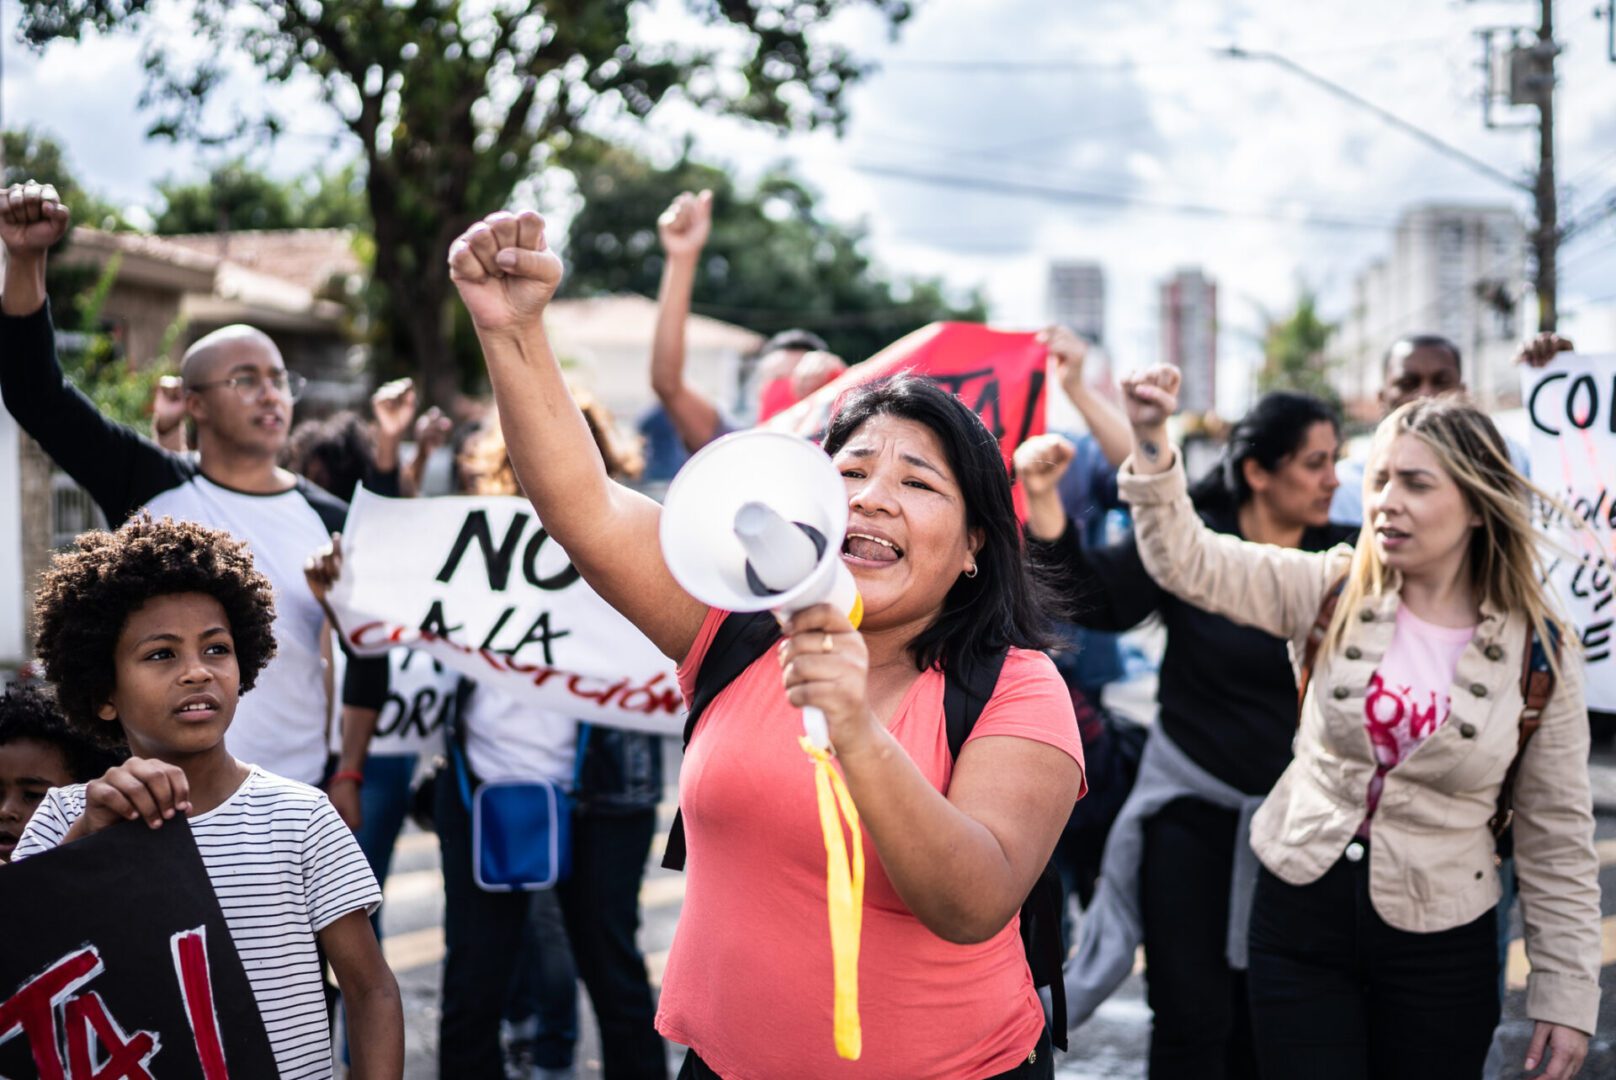 Hispanic woman talking in a megaphone during a protest in the street